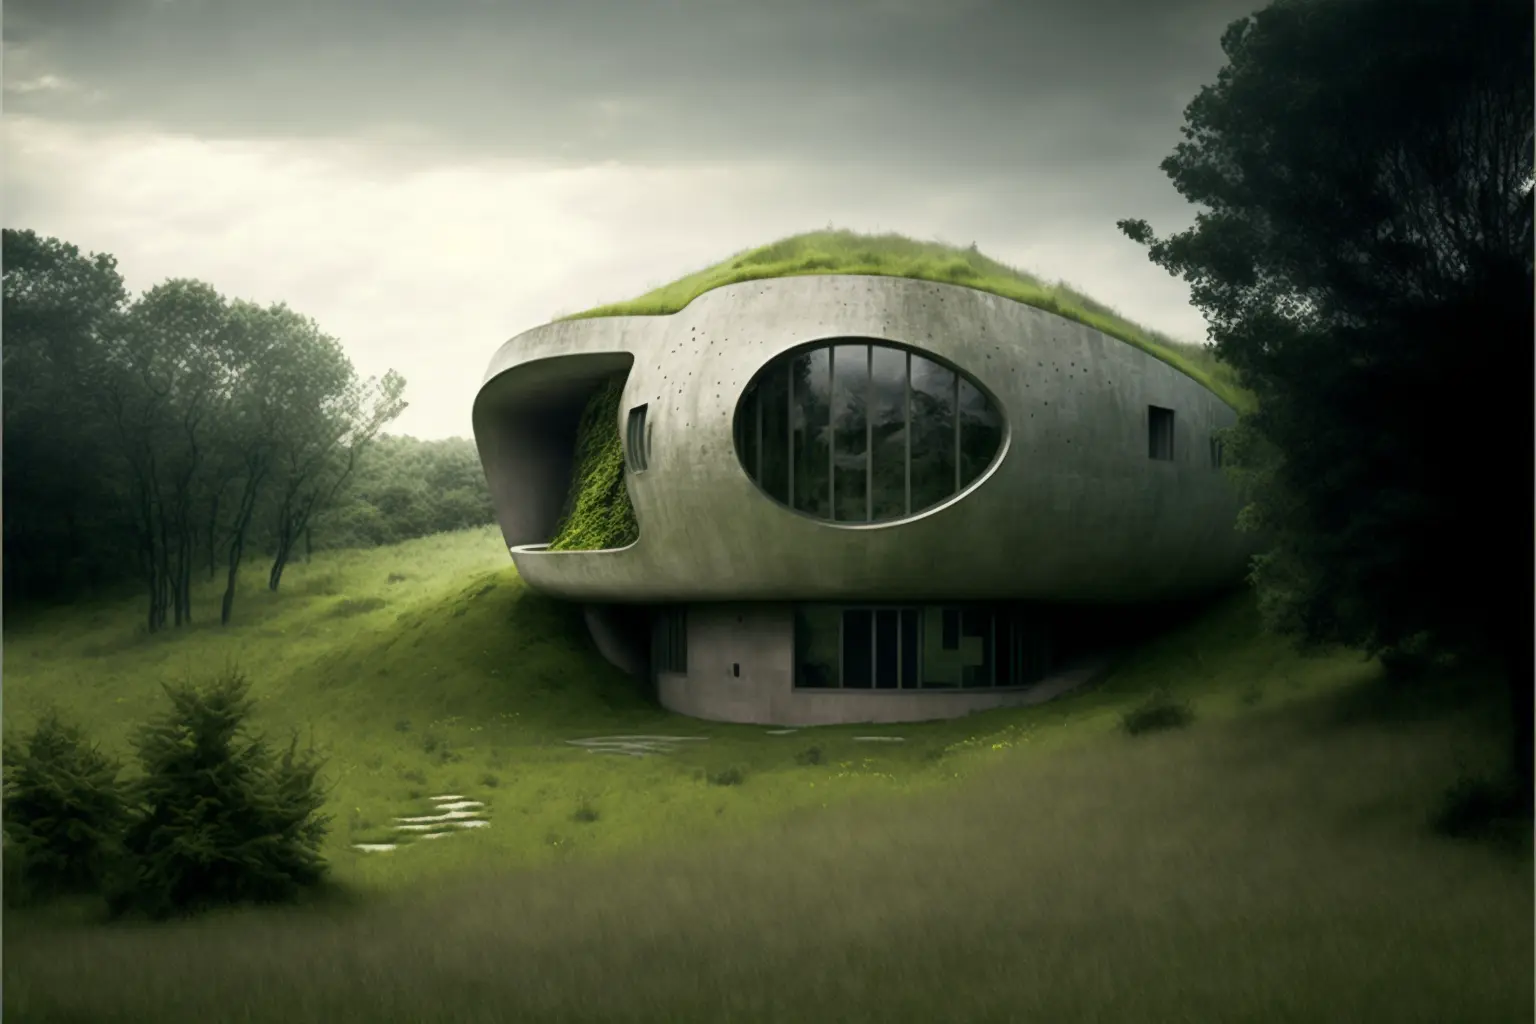 organic house embedded into a grassy hill, designed by Louis Kahn, architectural photography, style of archillect, futurism, modernist architecture